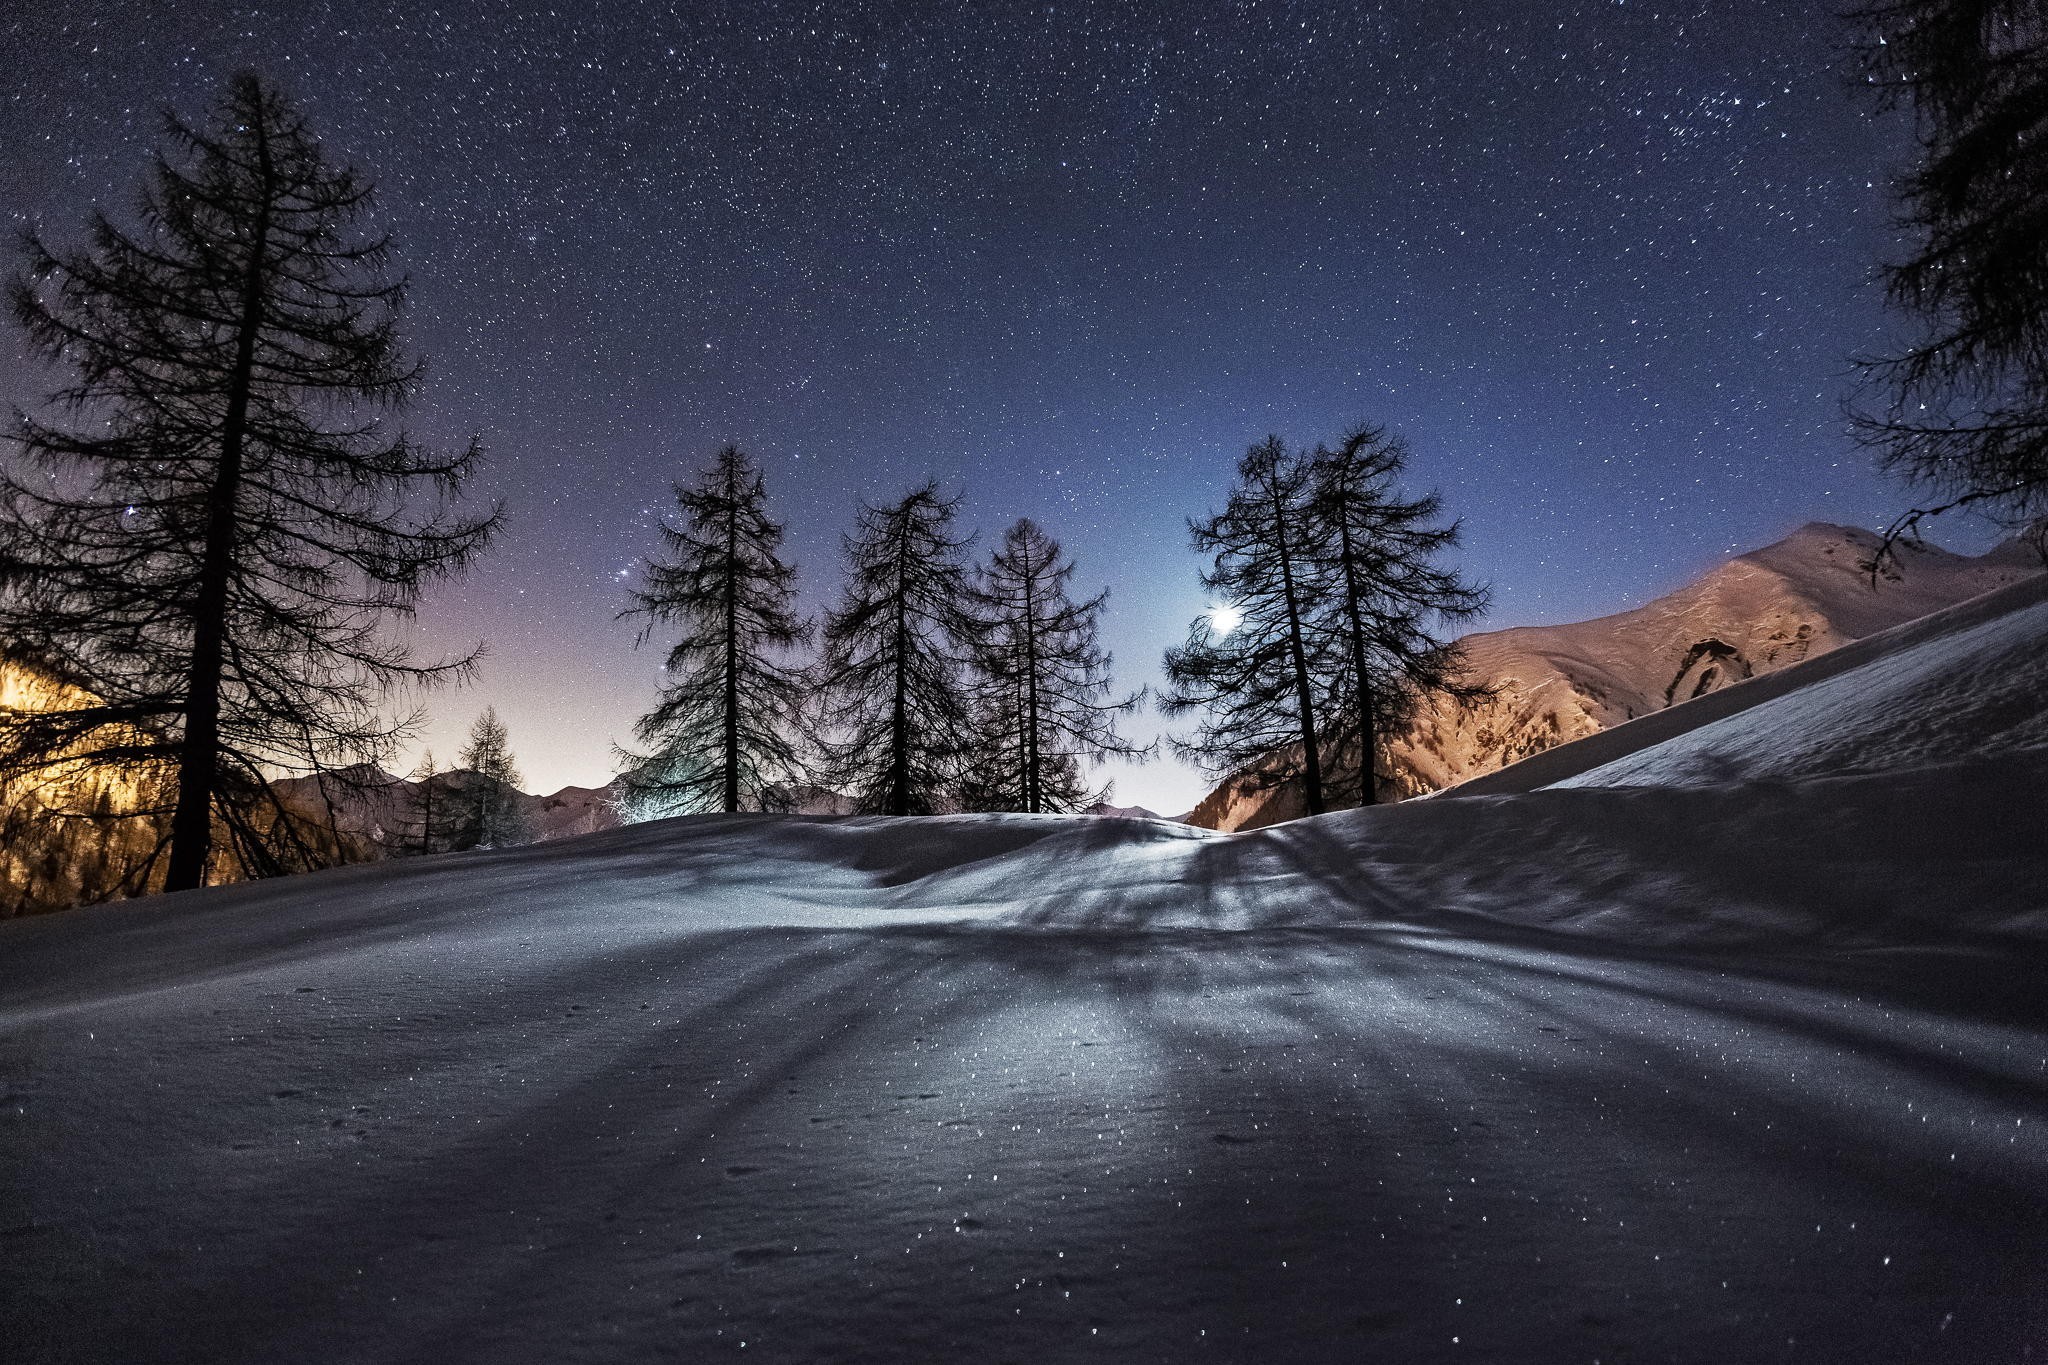 General 2048x1365 winter landscape night snow photography nature trees mountains Moon sky stars